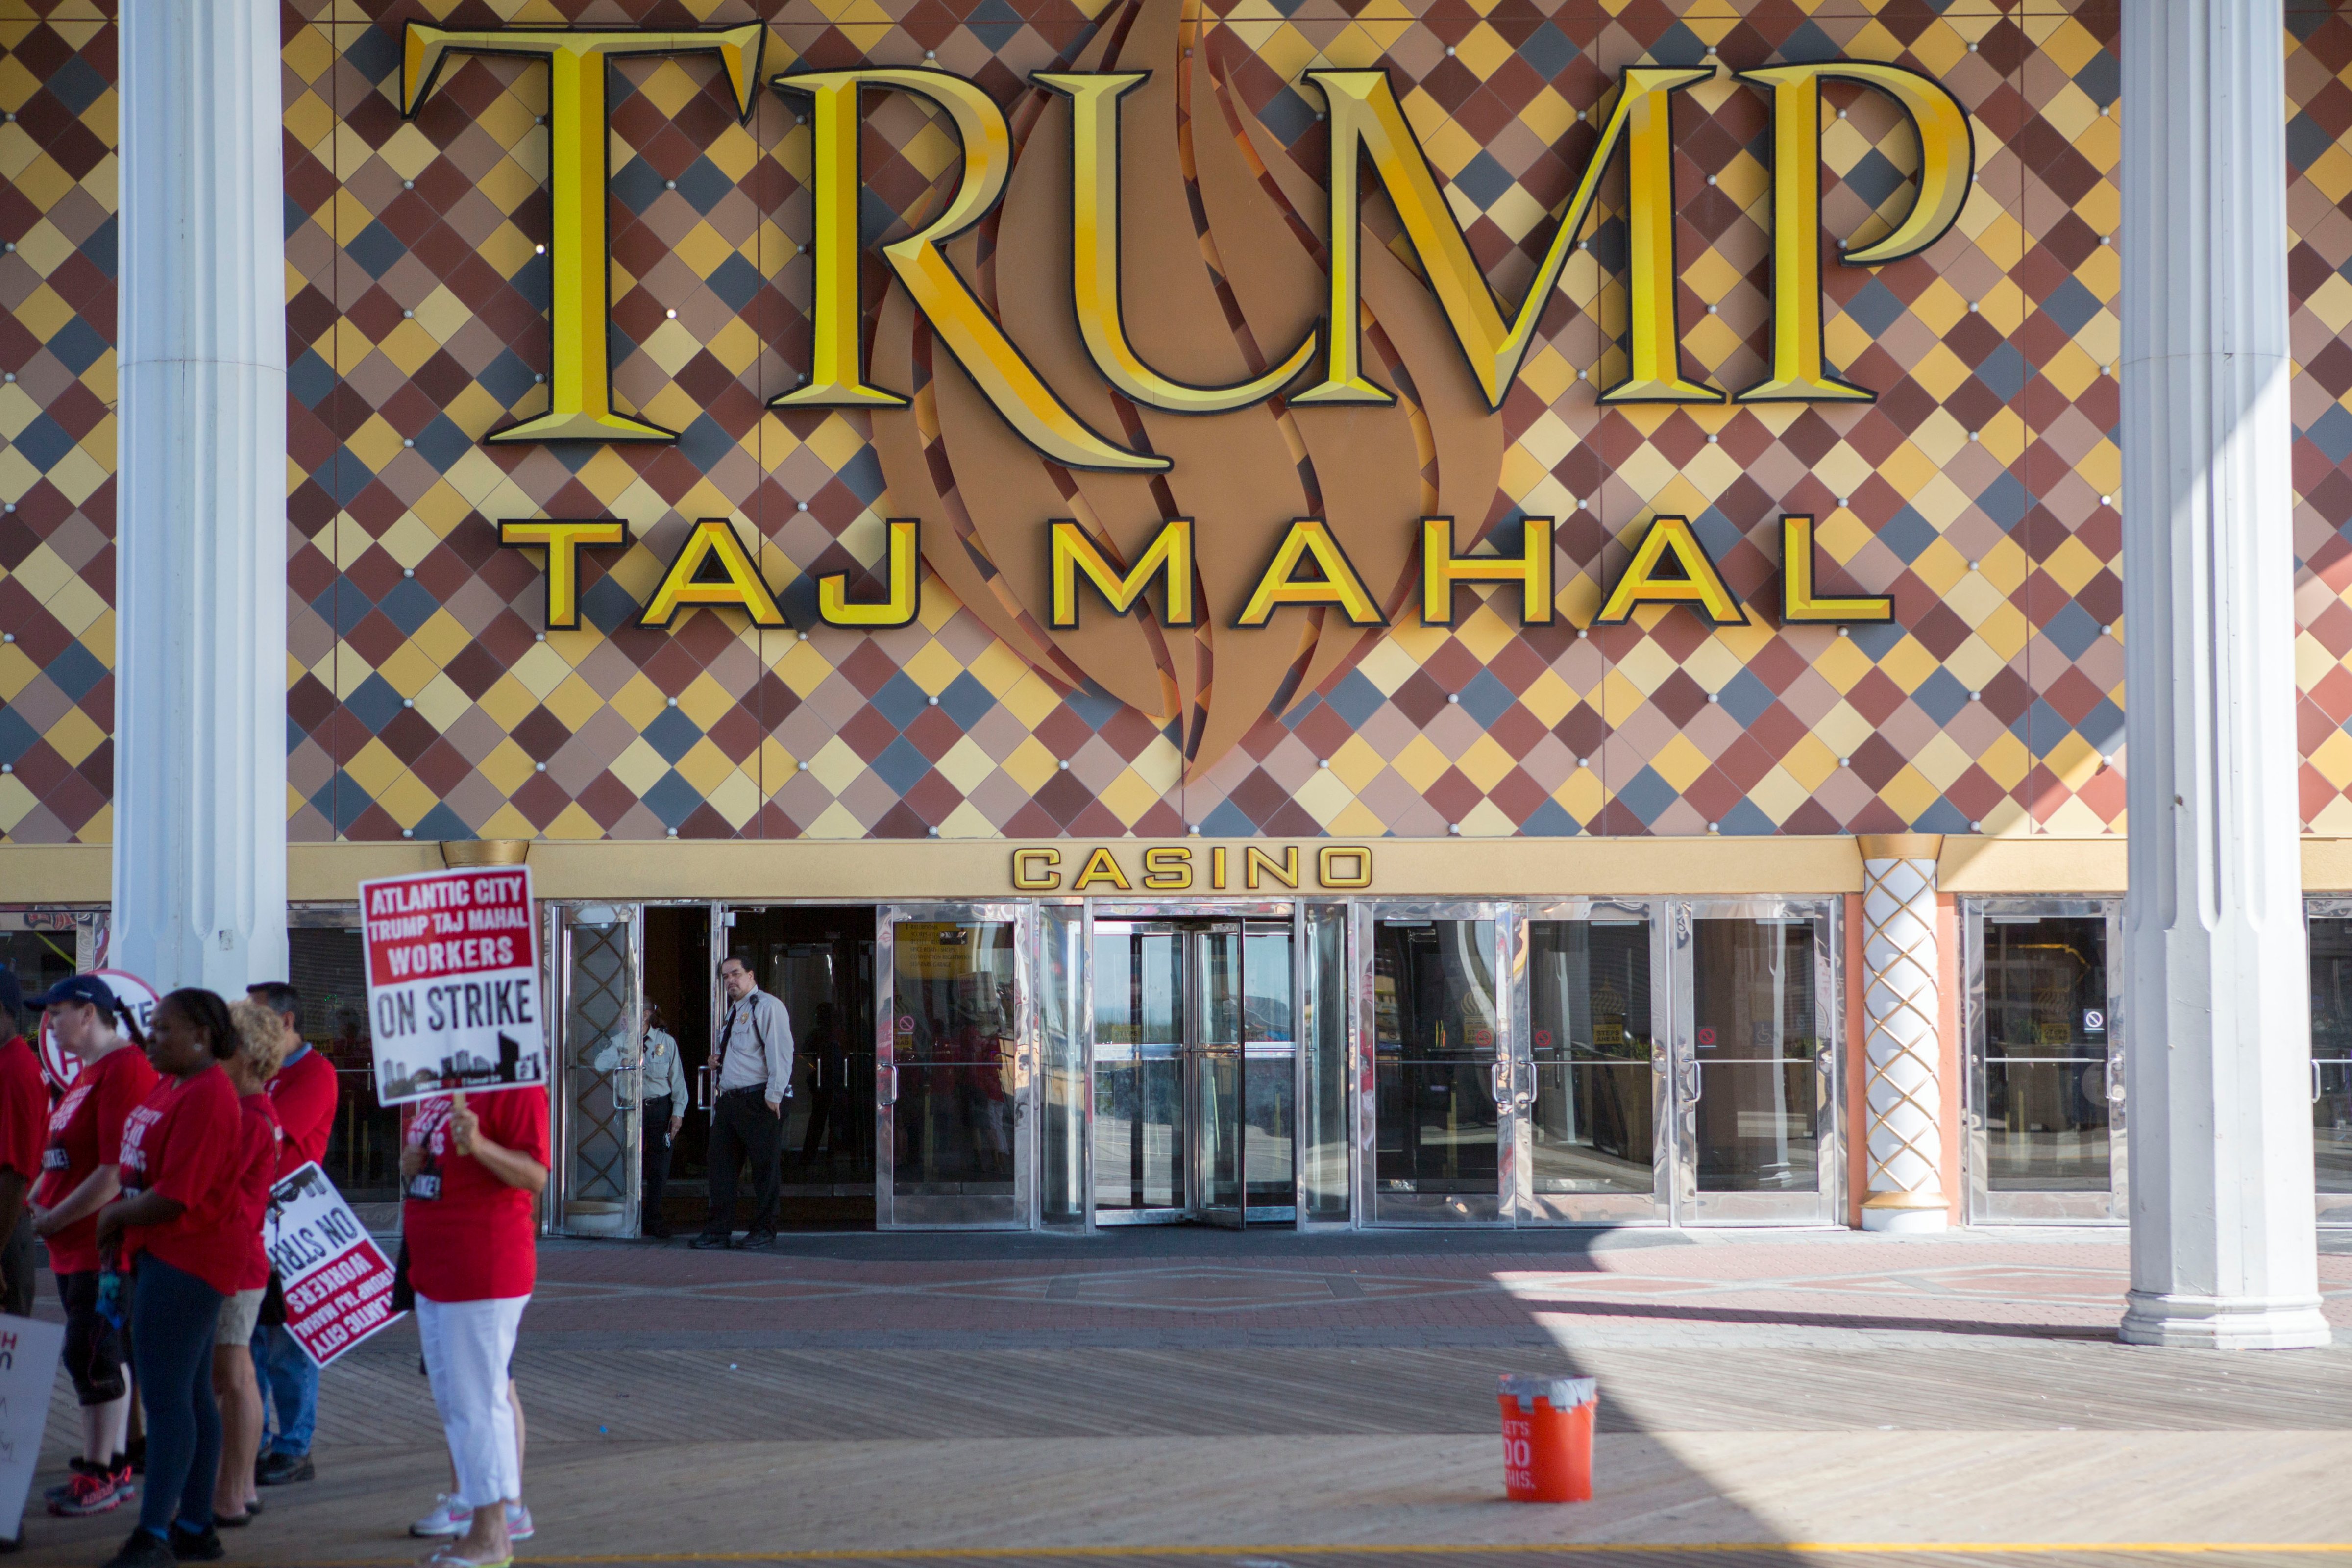 Unite Here local 54 casino worker's union members protest outside Trump Taj Mahal casino on July 6, 2016 in Atlantic City, New Jersey. (Jessica Kourkounis/Getty Images)